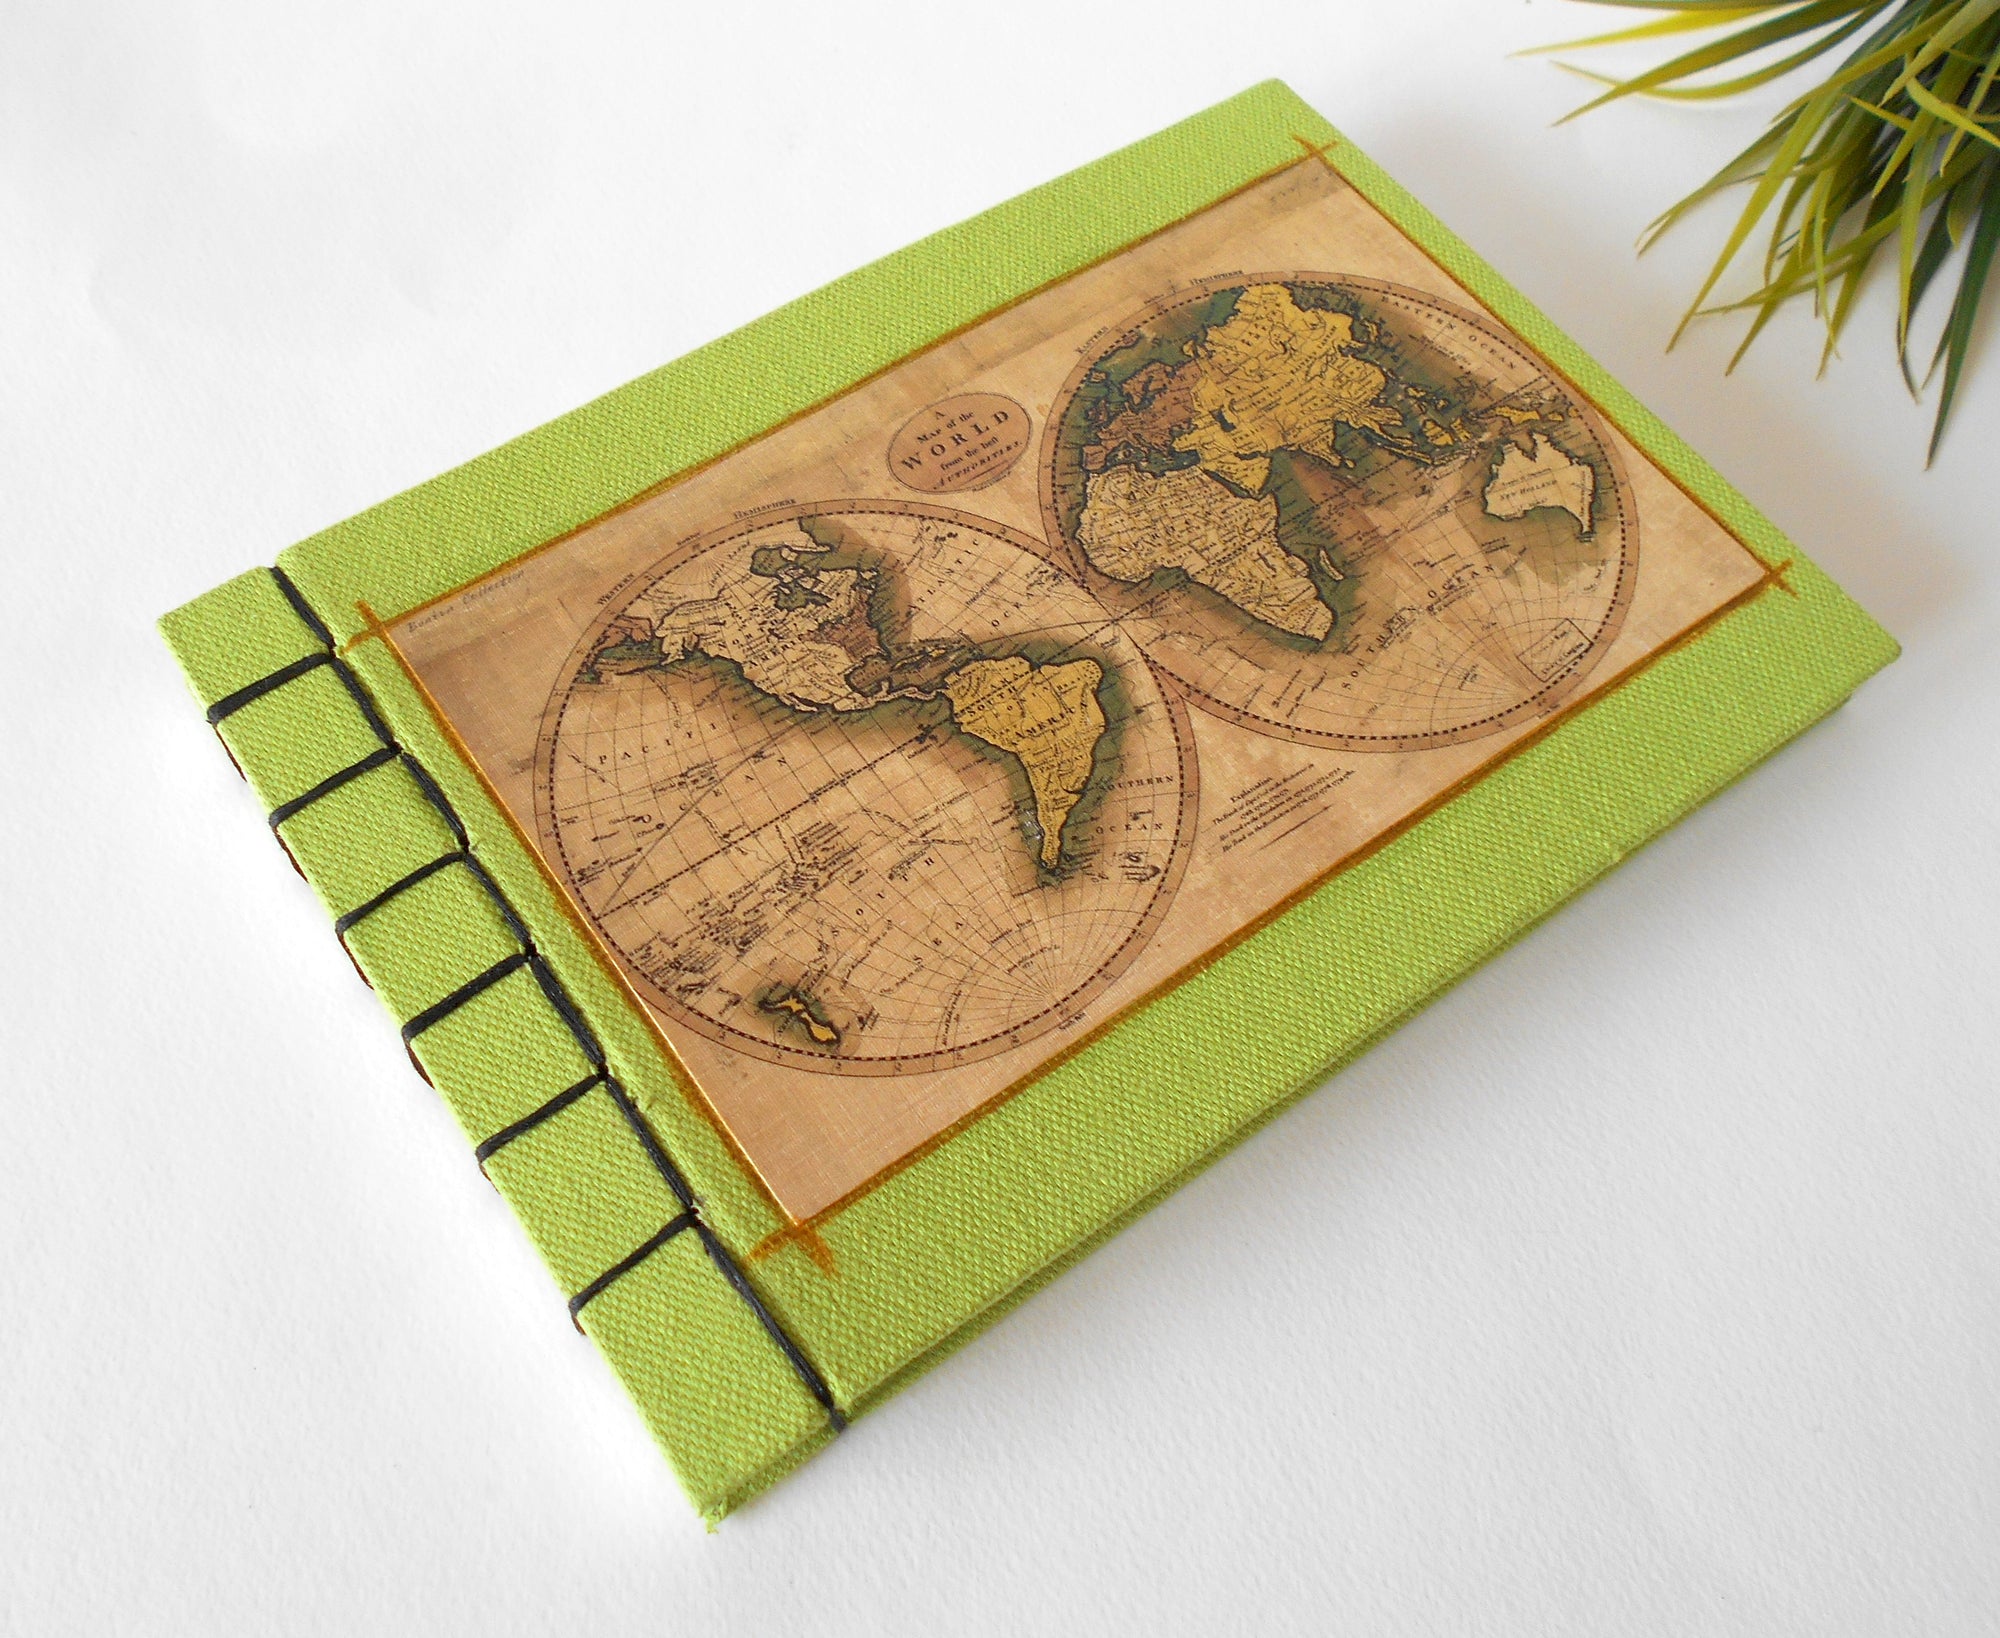 Map sketchbook journal- antique world map- 100% recycled pages- eco-friendly burlap fabric journal- journal with Hemp stab binding & green burlap